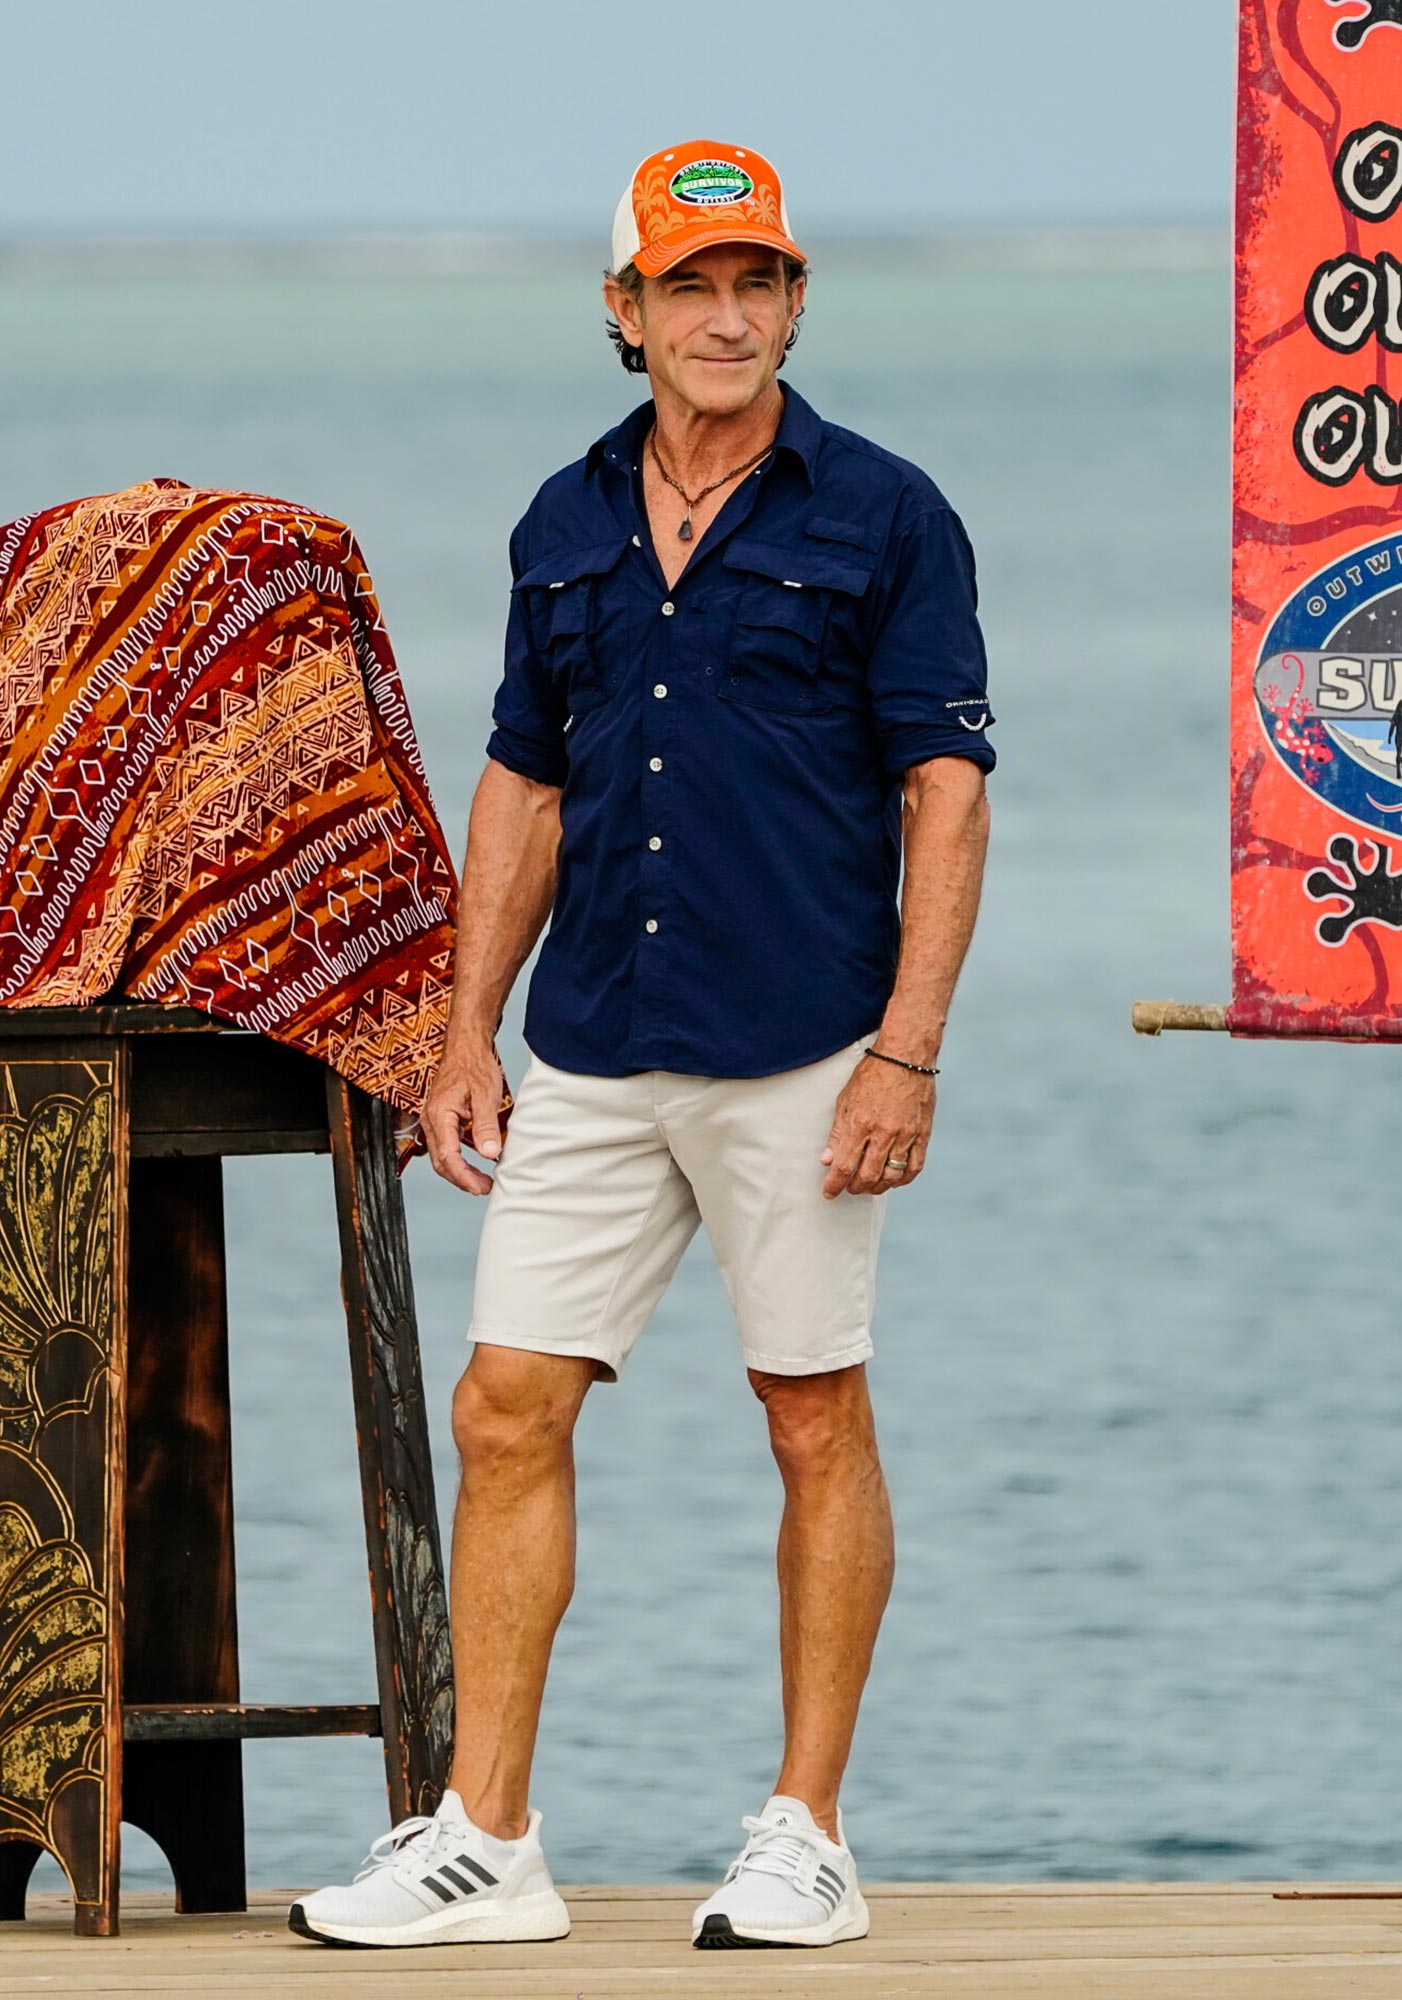 Jeff Probst Says Survivor s Psychologists Would Intervene if Needed Following Ben s Panic Attack 603